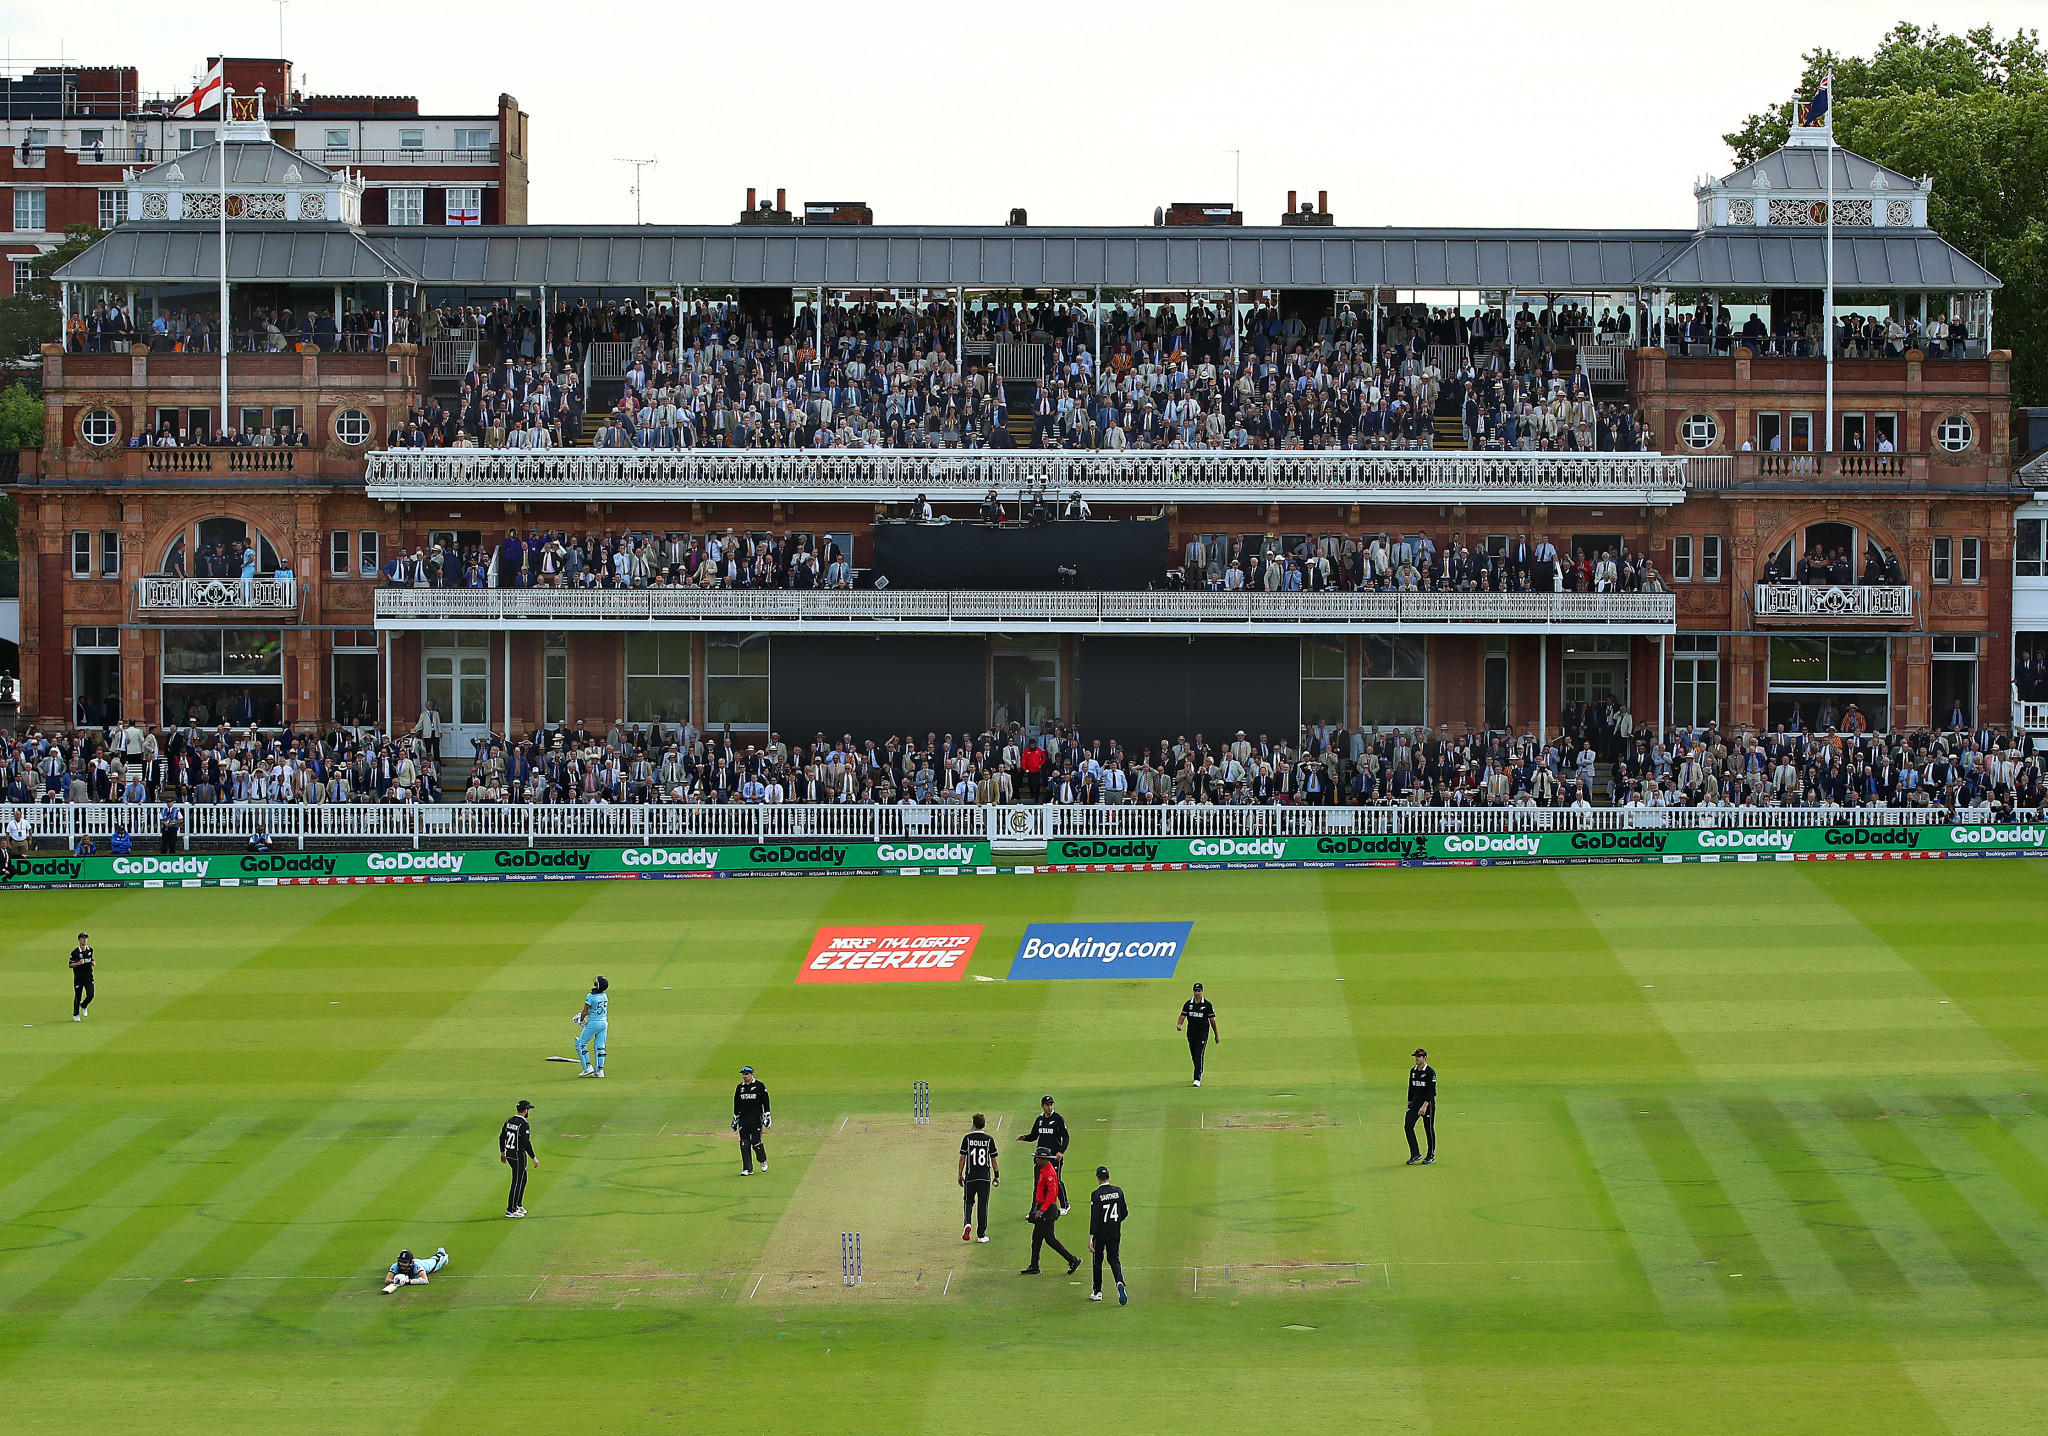 Sunset+Vine received an award for their coverage of last year's ICC Cricket World Cup Final ©Getty Images